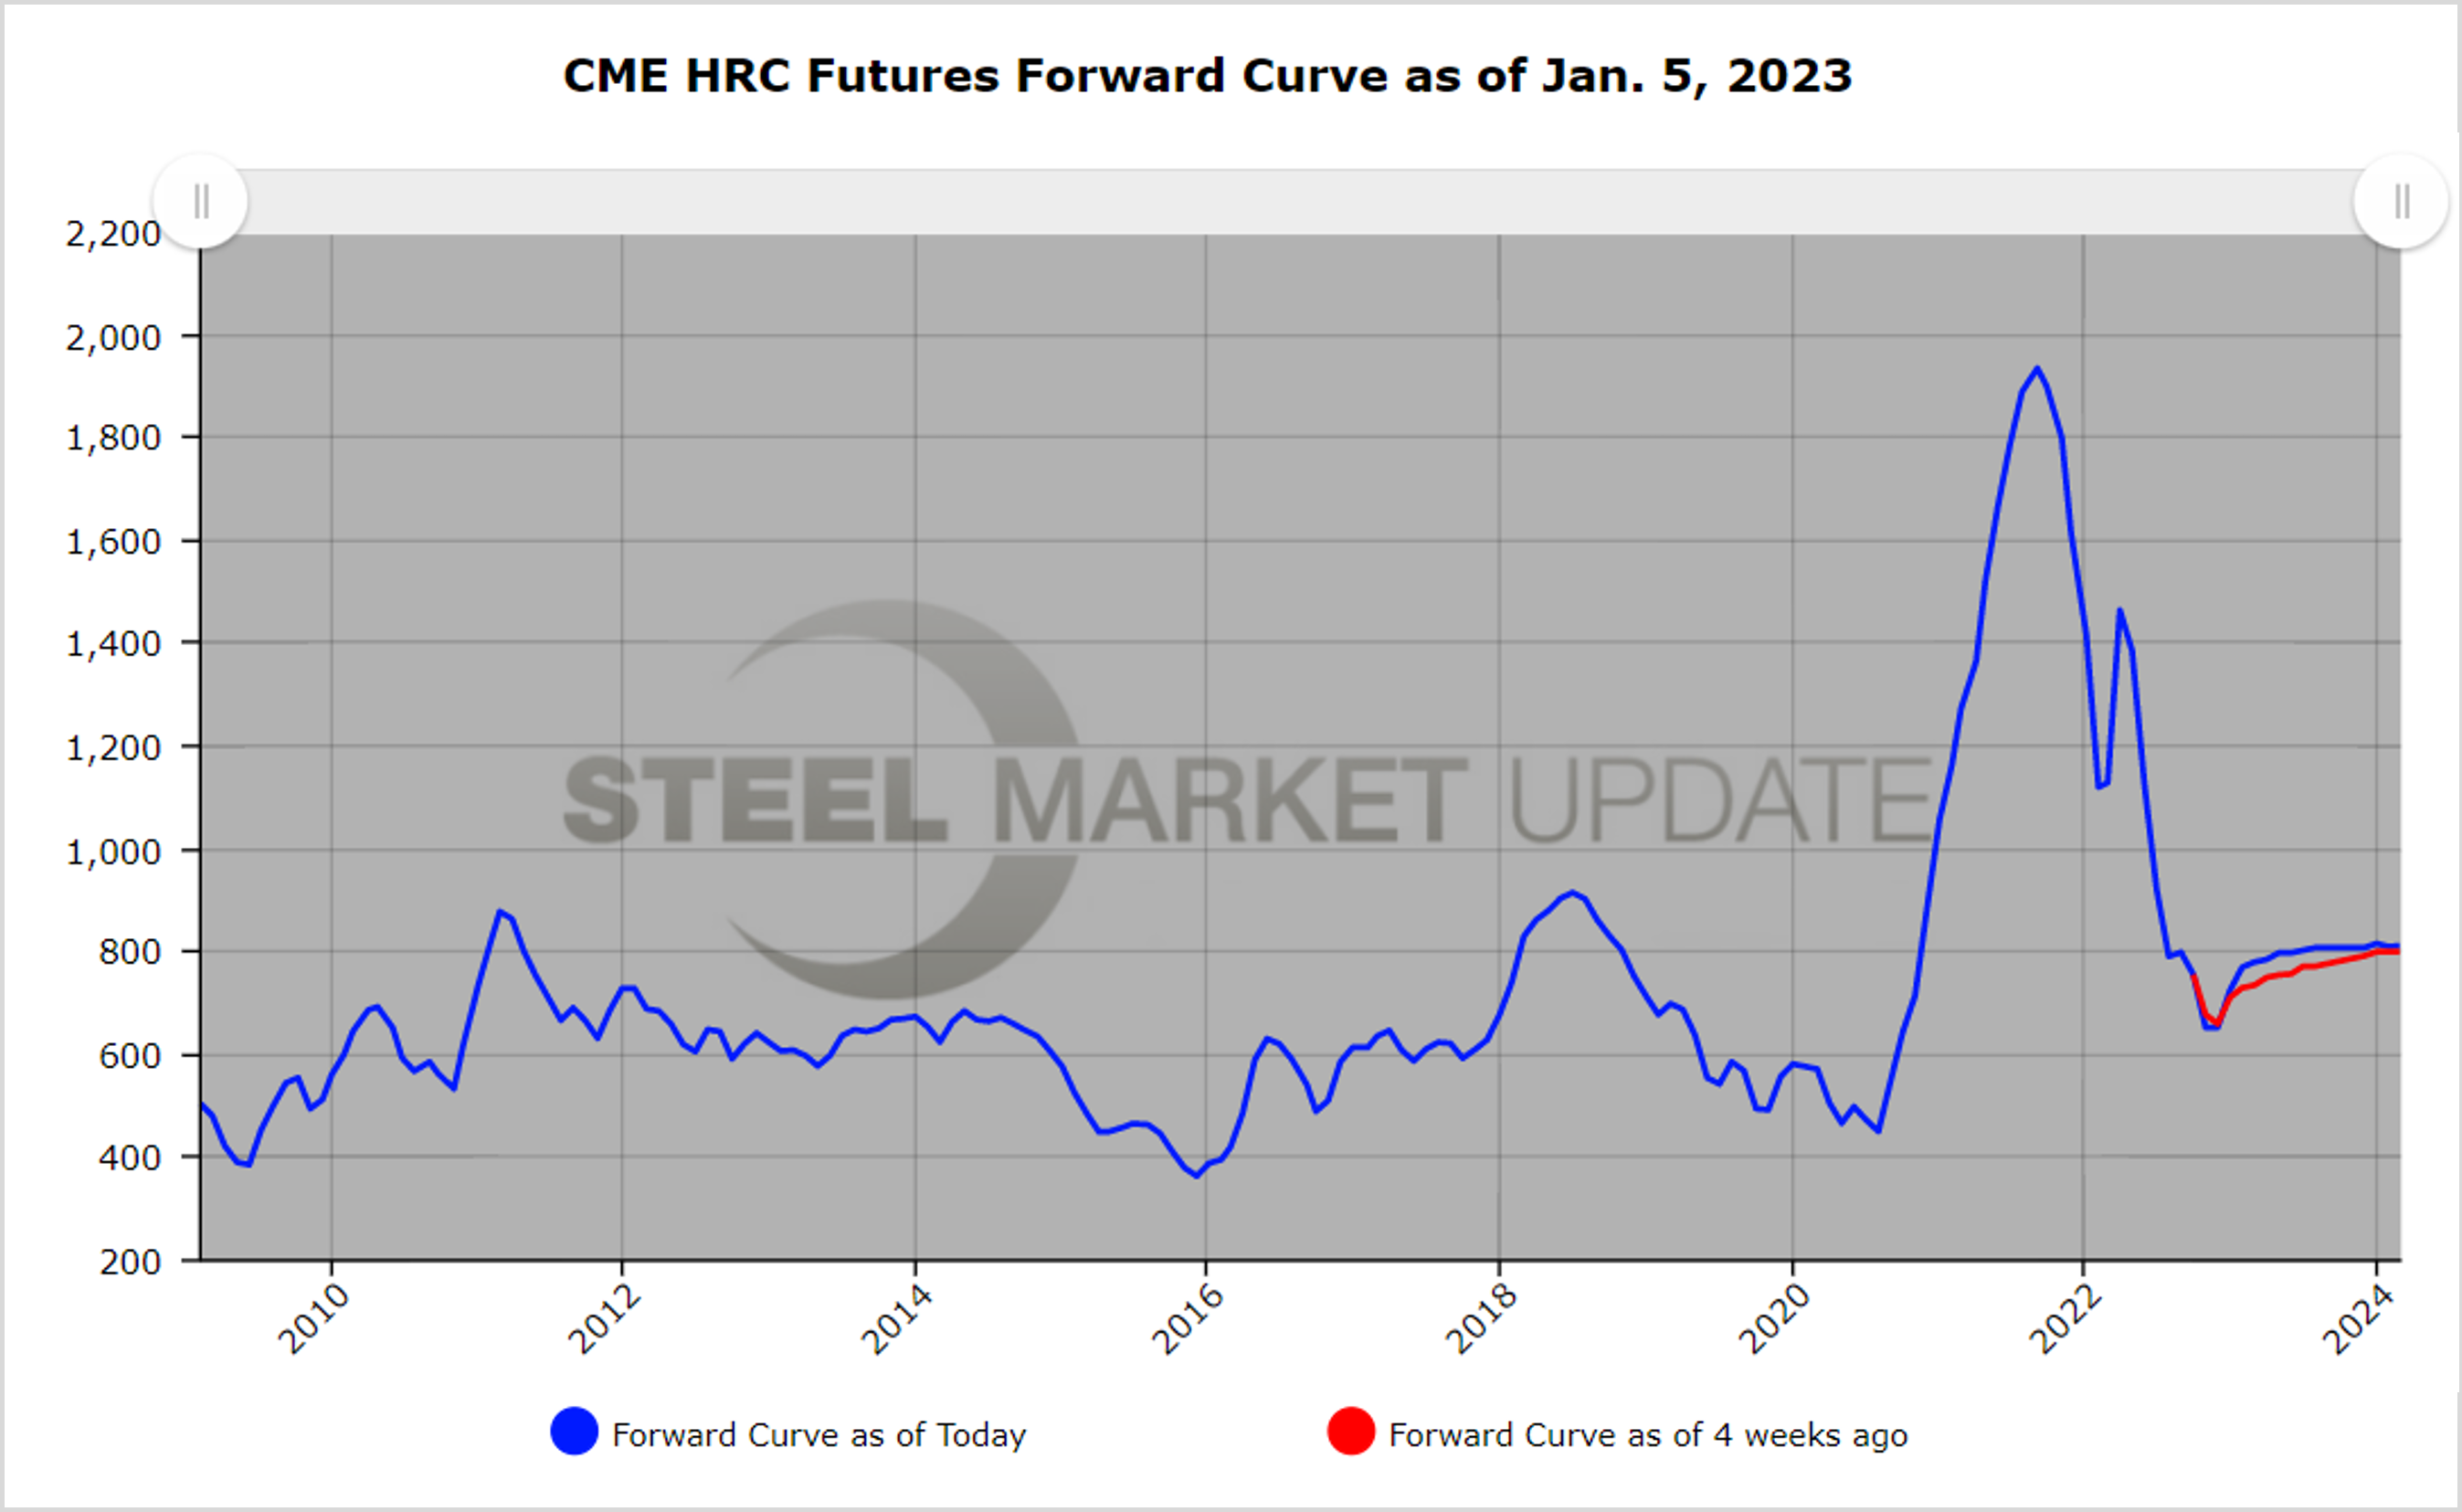 CME HRCFutures 010523.Fig1